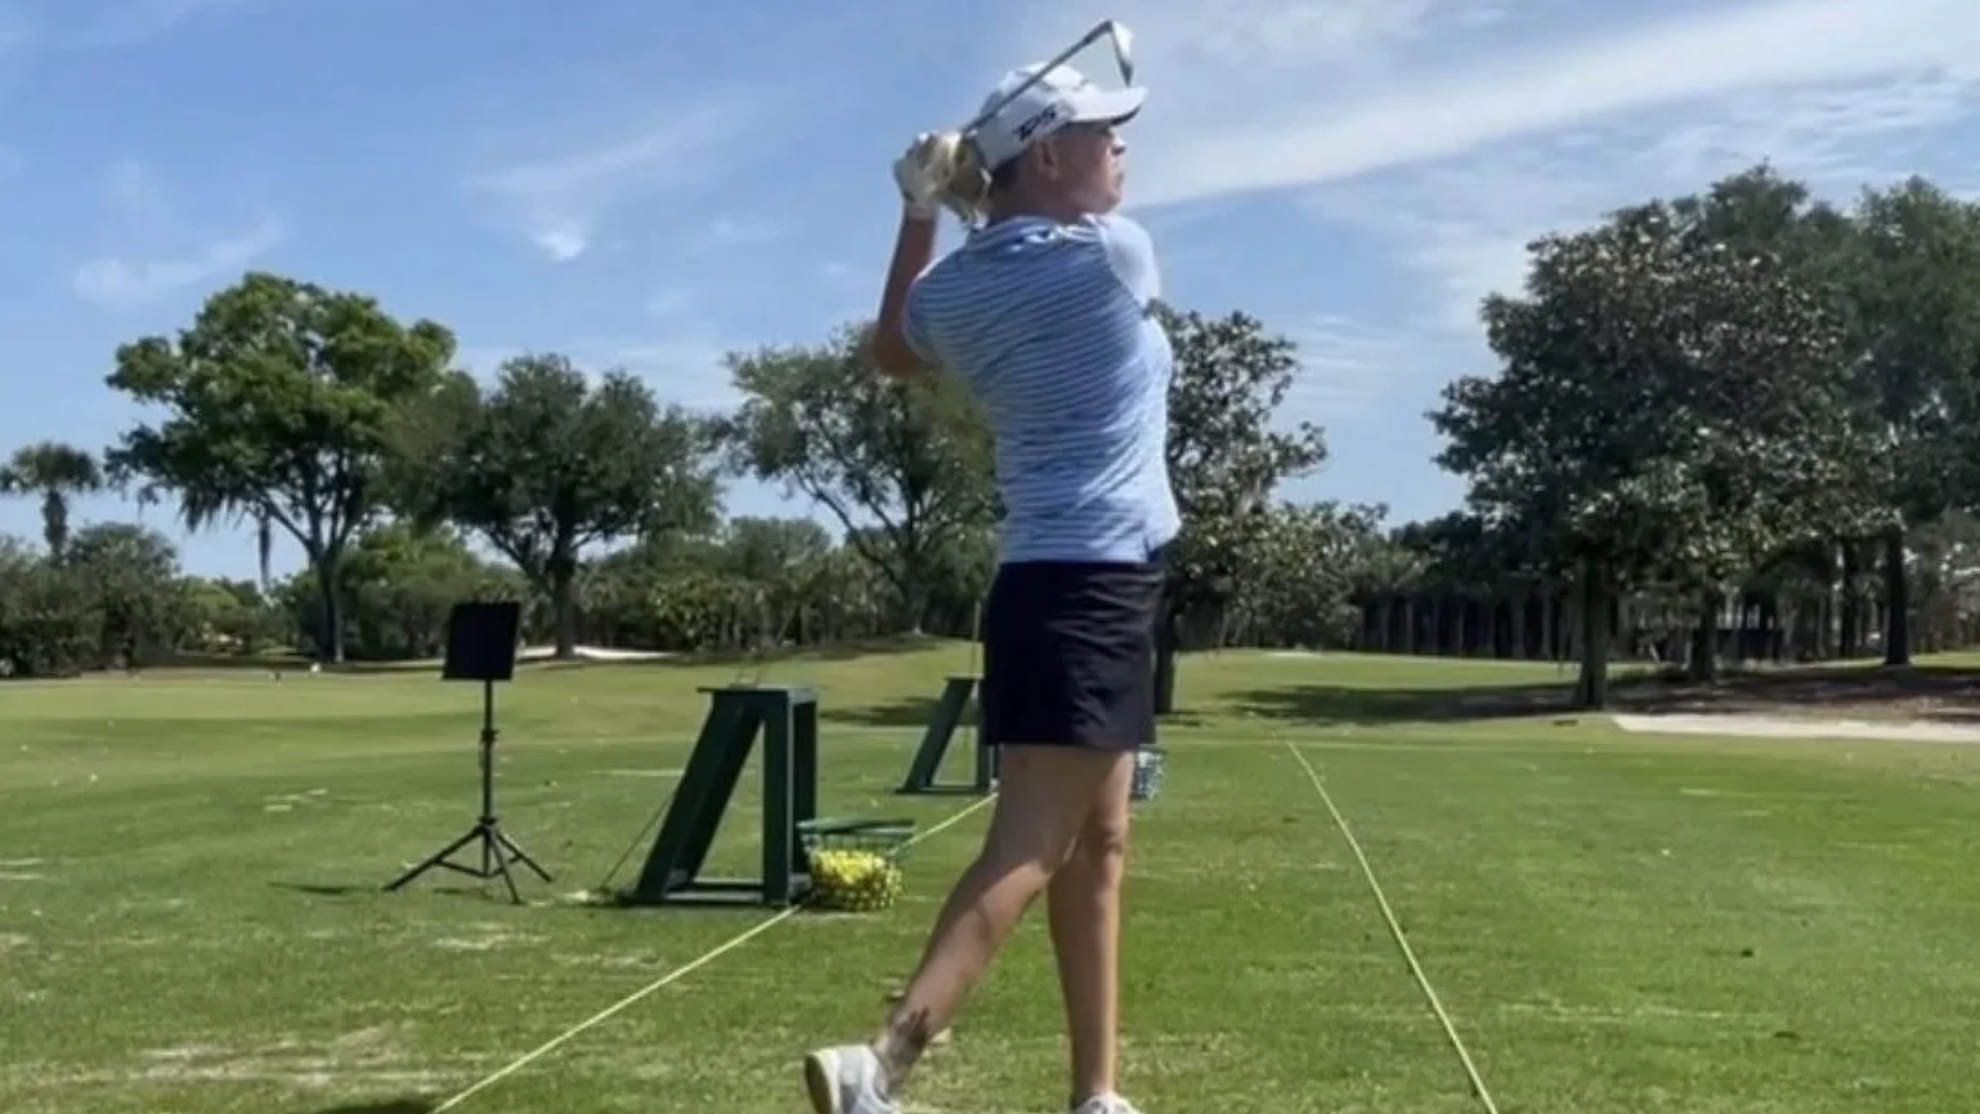 Trans golfer Hailey Davidson fights to join the LPGA Tour